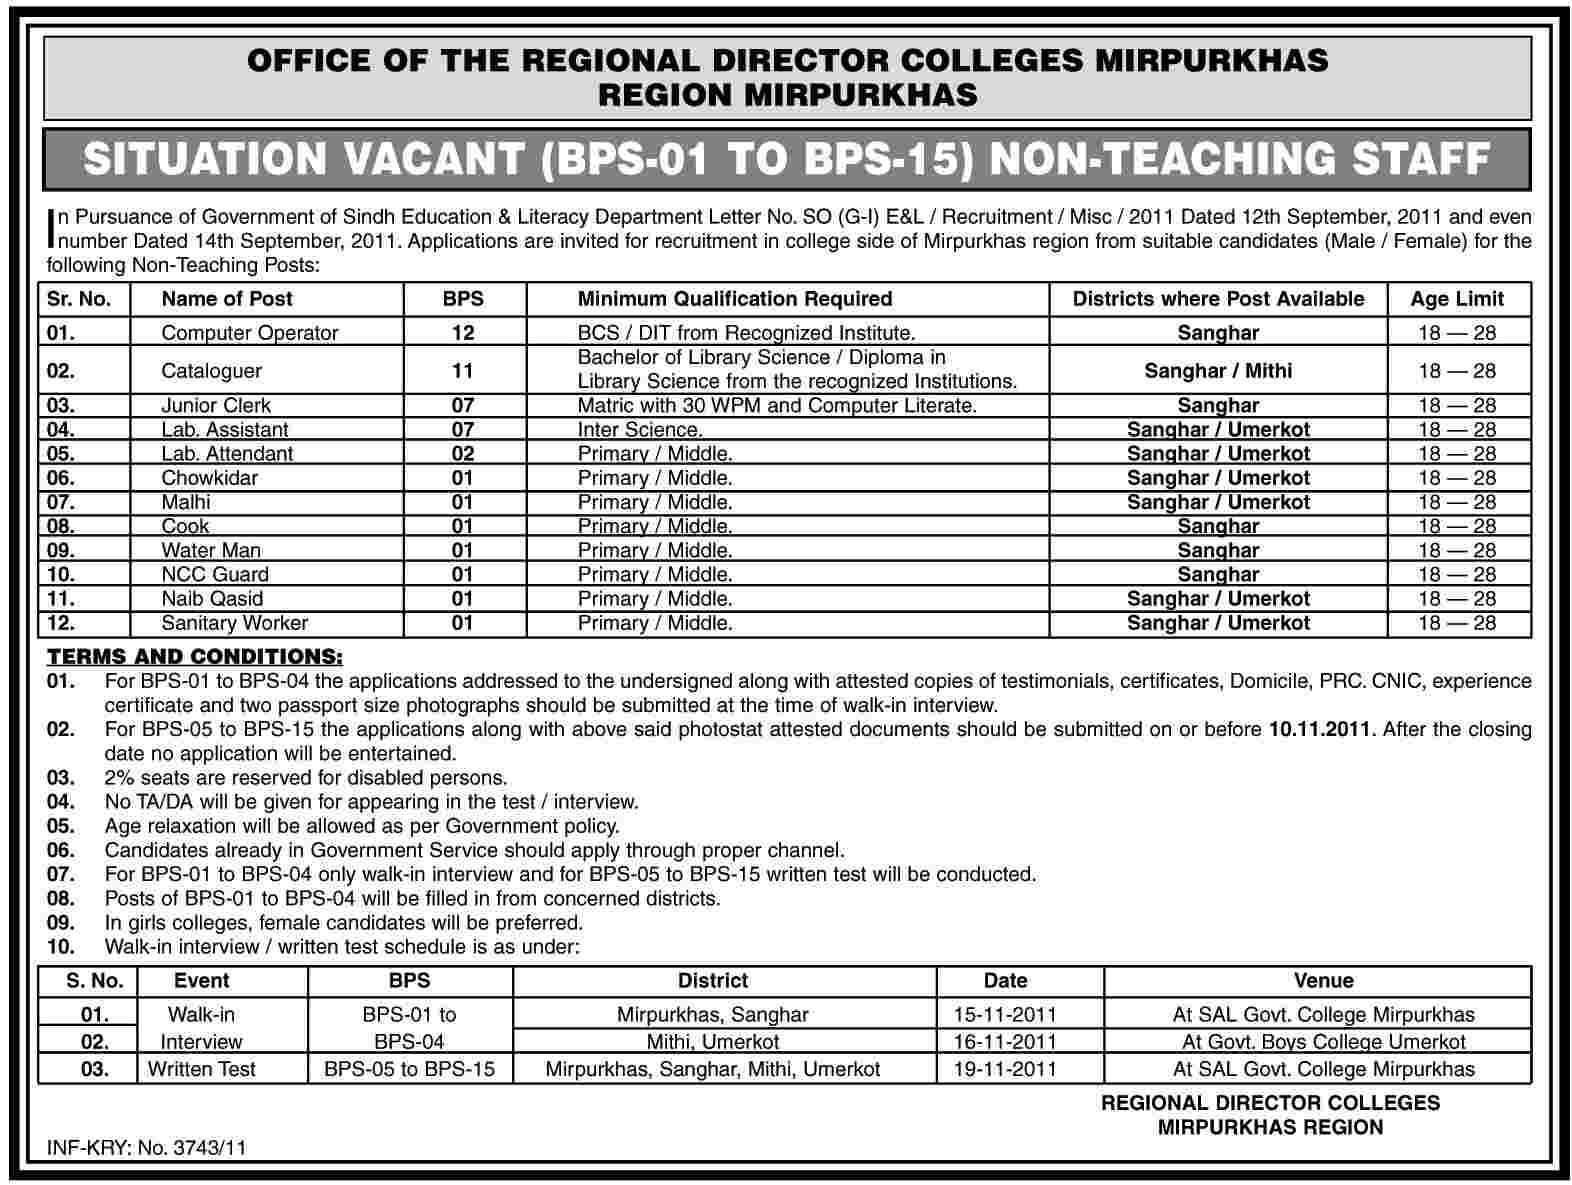 Office of the Regional Director Colleges Mirpurkhas, Jobs Opportunities